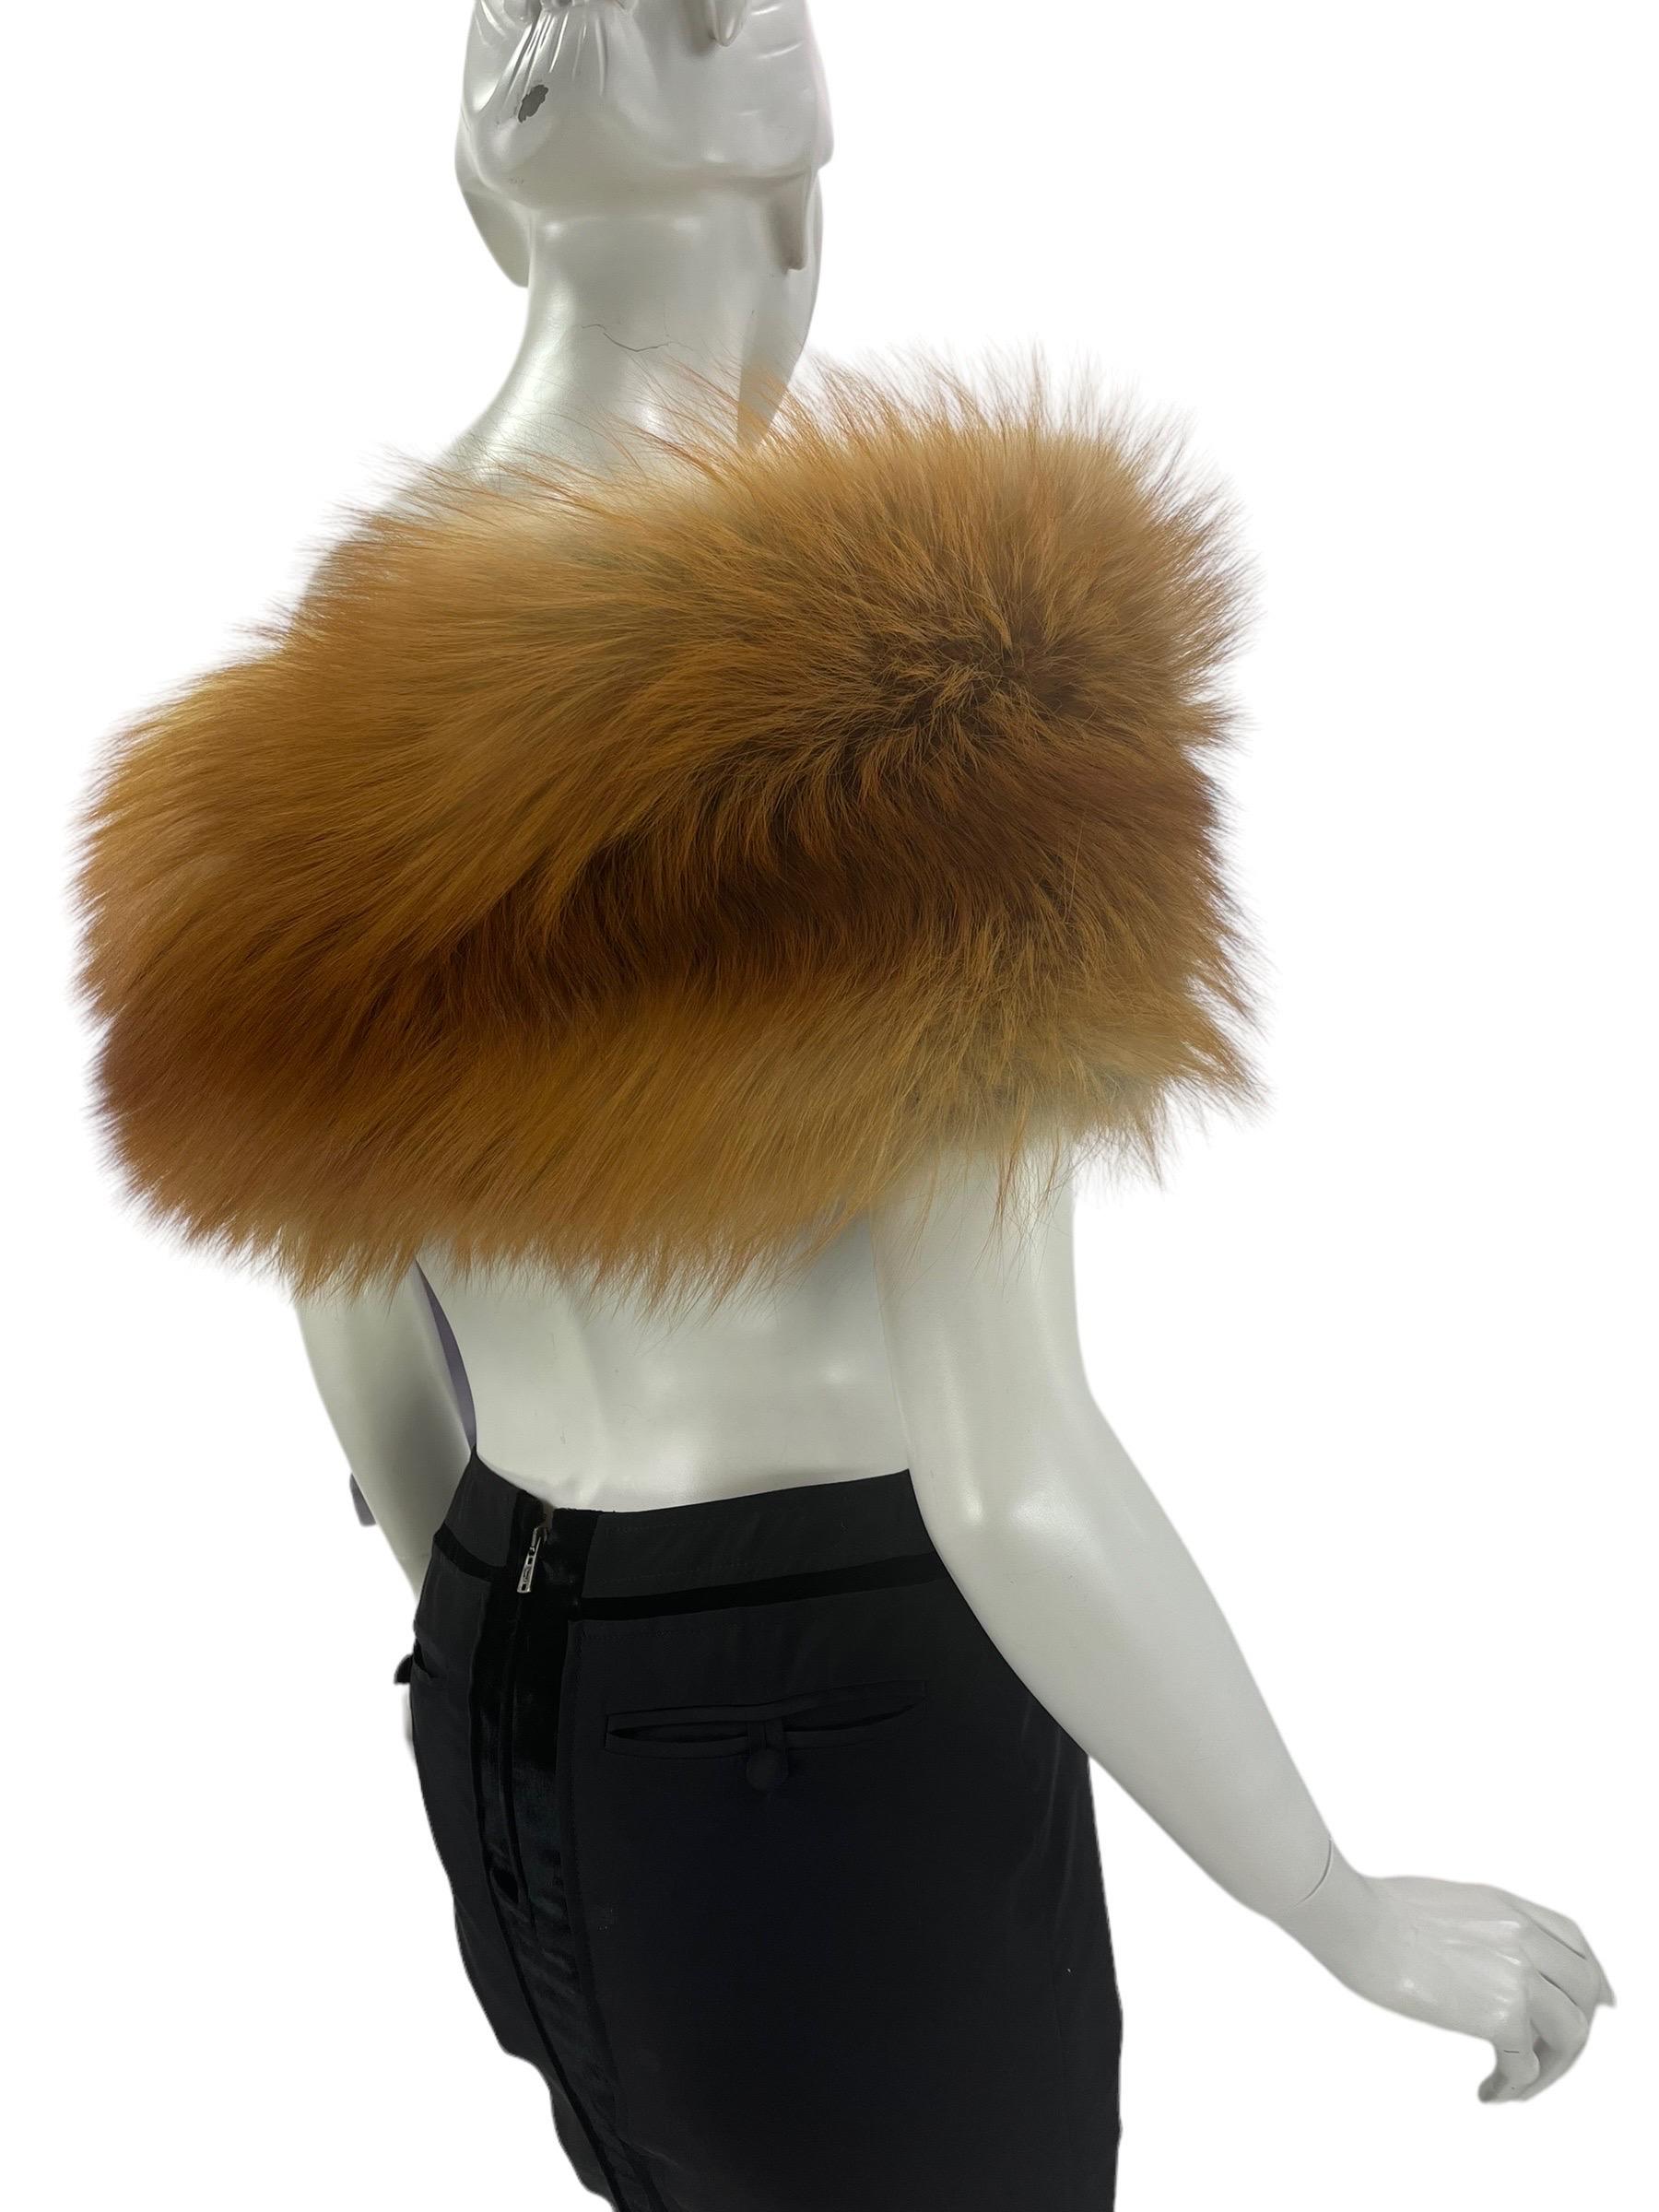 Women's 2003 Vintage Tom Ford for YSL Fox Fur Stole as seen on Rihanna 